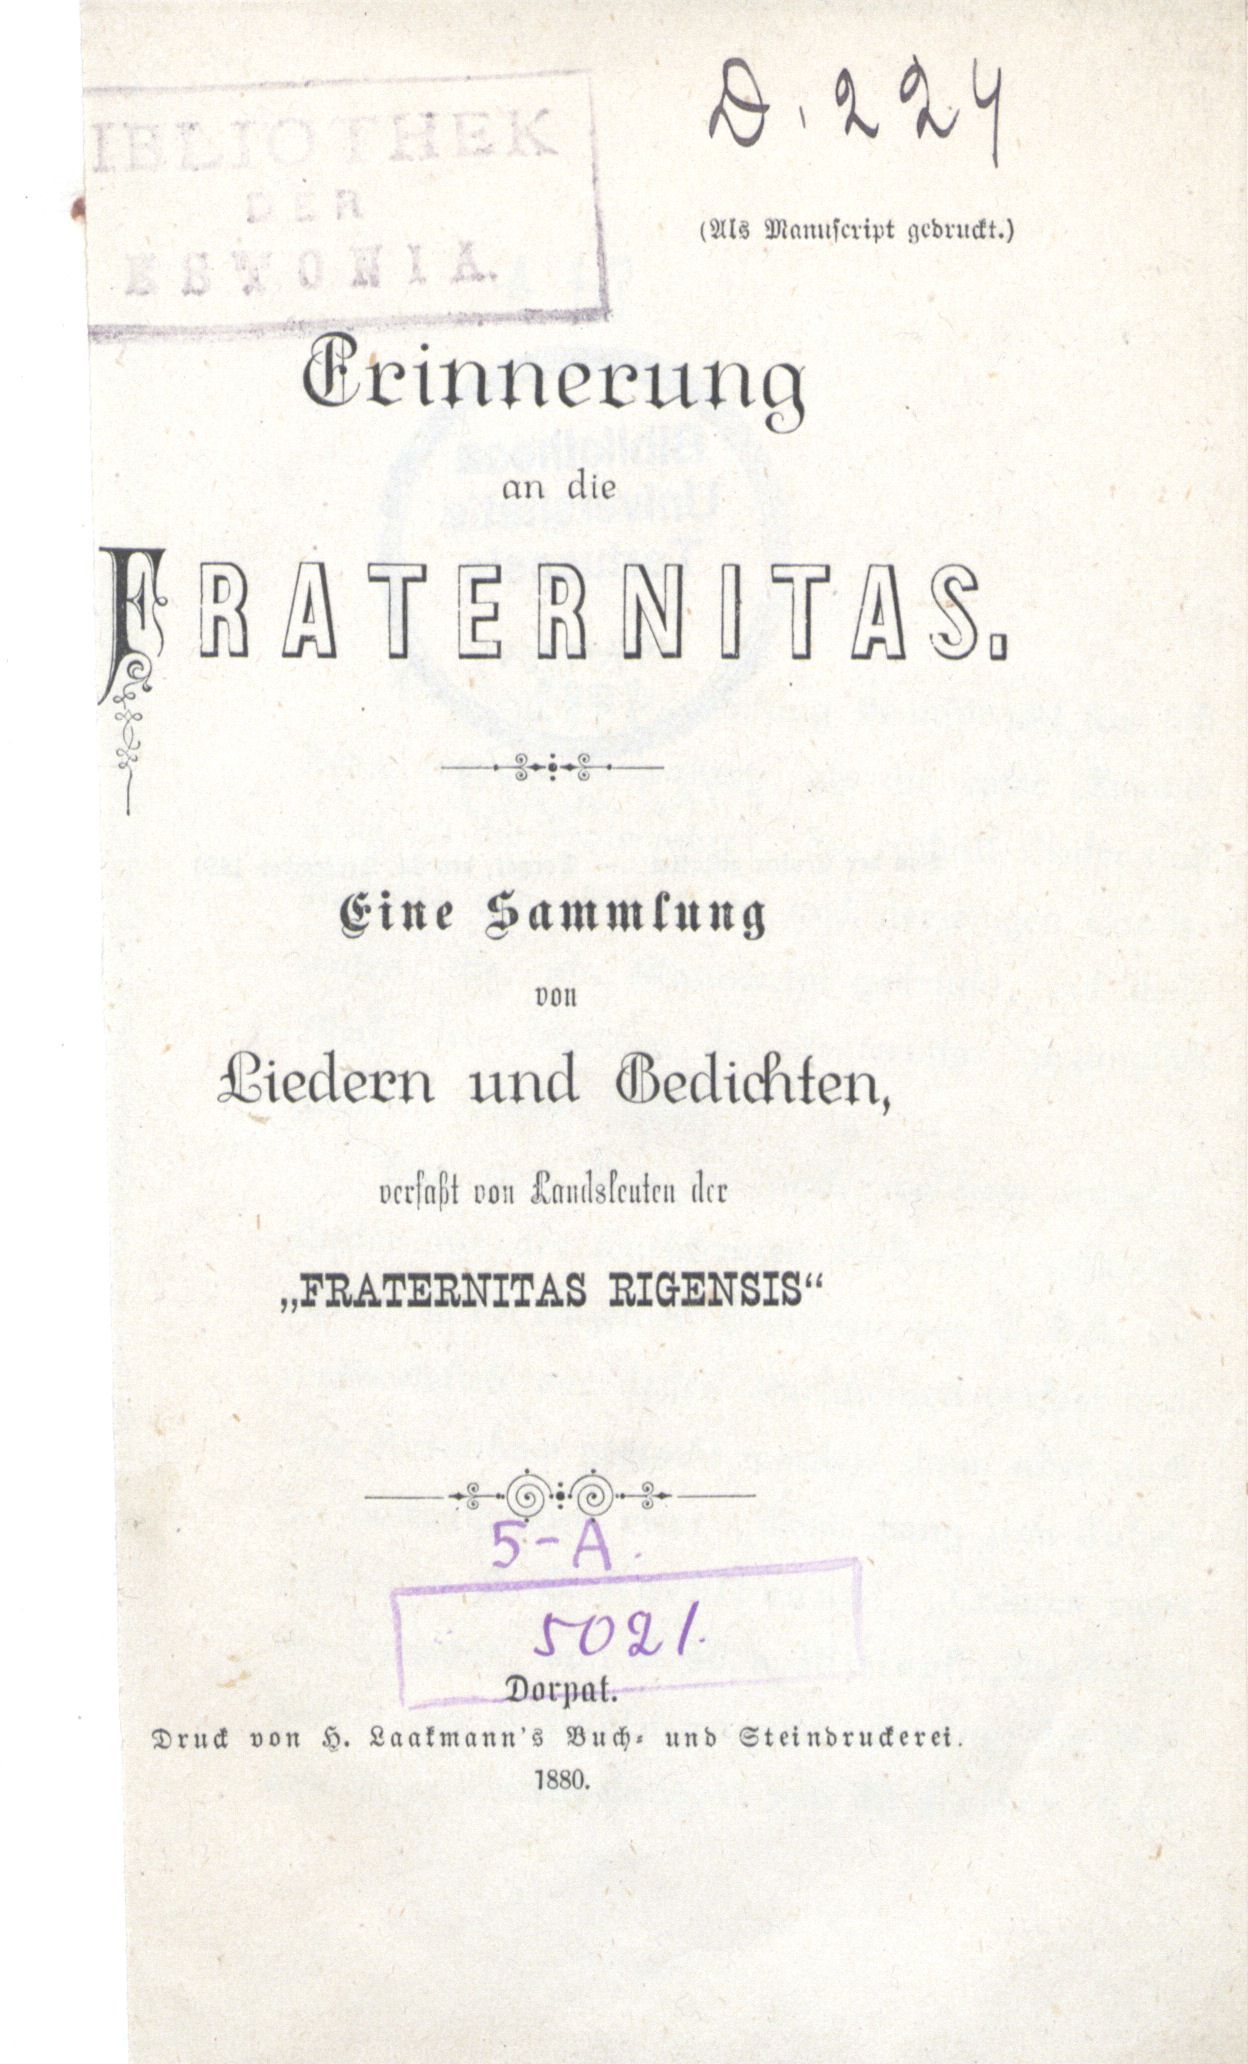 Erinnerung an die Fraternitas (1880) | 3. Title page